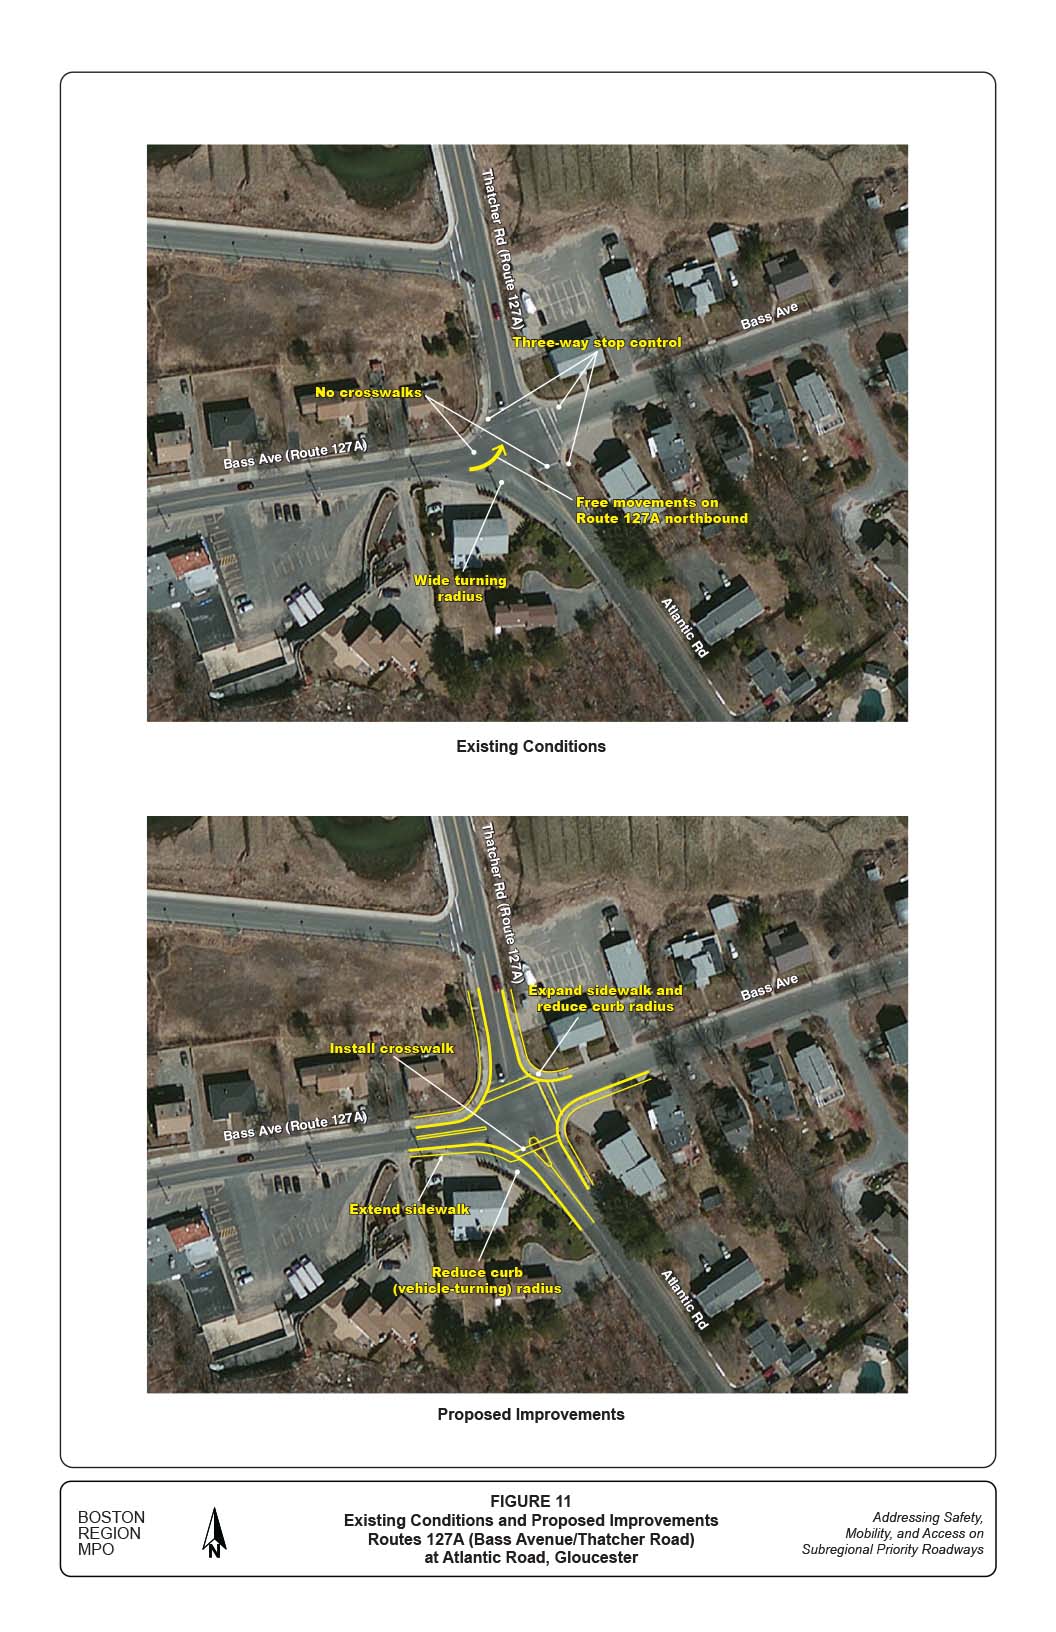 FIGURE 11. Existing Conditions and Proposed Improvements Routes 127A (Bass Avenue/Thatcher Road) at Atlantic Road, Gloucester
This figure contains two aerial-view maps of the intersection of Routes 127A (Bass Avenue/Thatcher Road) at Atlantic Road, Gloucester in the study area. The maps denote, with both text and pointing arrows, the existing conditions and proposed improvements. 
1)	The first image, Existing Conditions, cites (in a clock-wise direction): Three-way stop control; free movements on Route 127A northbound; wide turning radius; and no crosswalks. 
2)	The second image, Proposed Improvements, cites (in a clock-wise direction): Expand sidewalk and reduce curb radius; reduce curb (vehicle-turning) radius; extend sidewalk; and install crosswalk.
